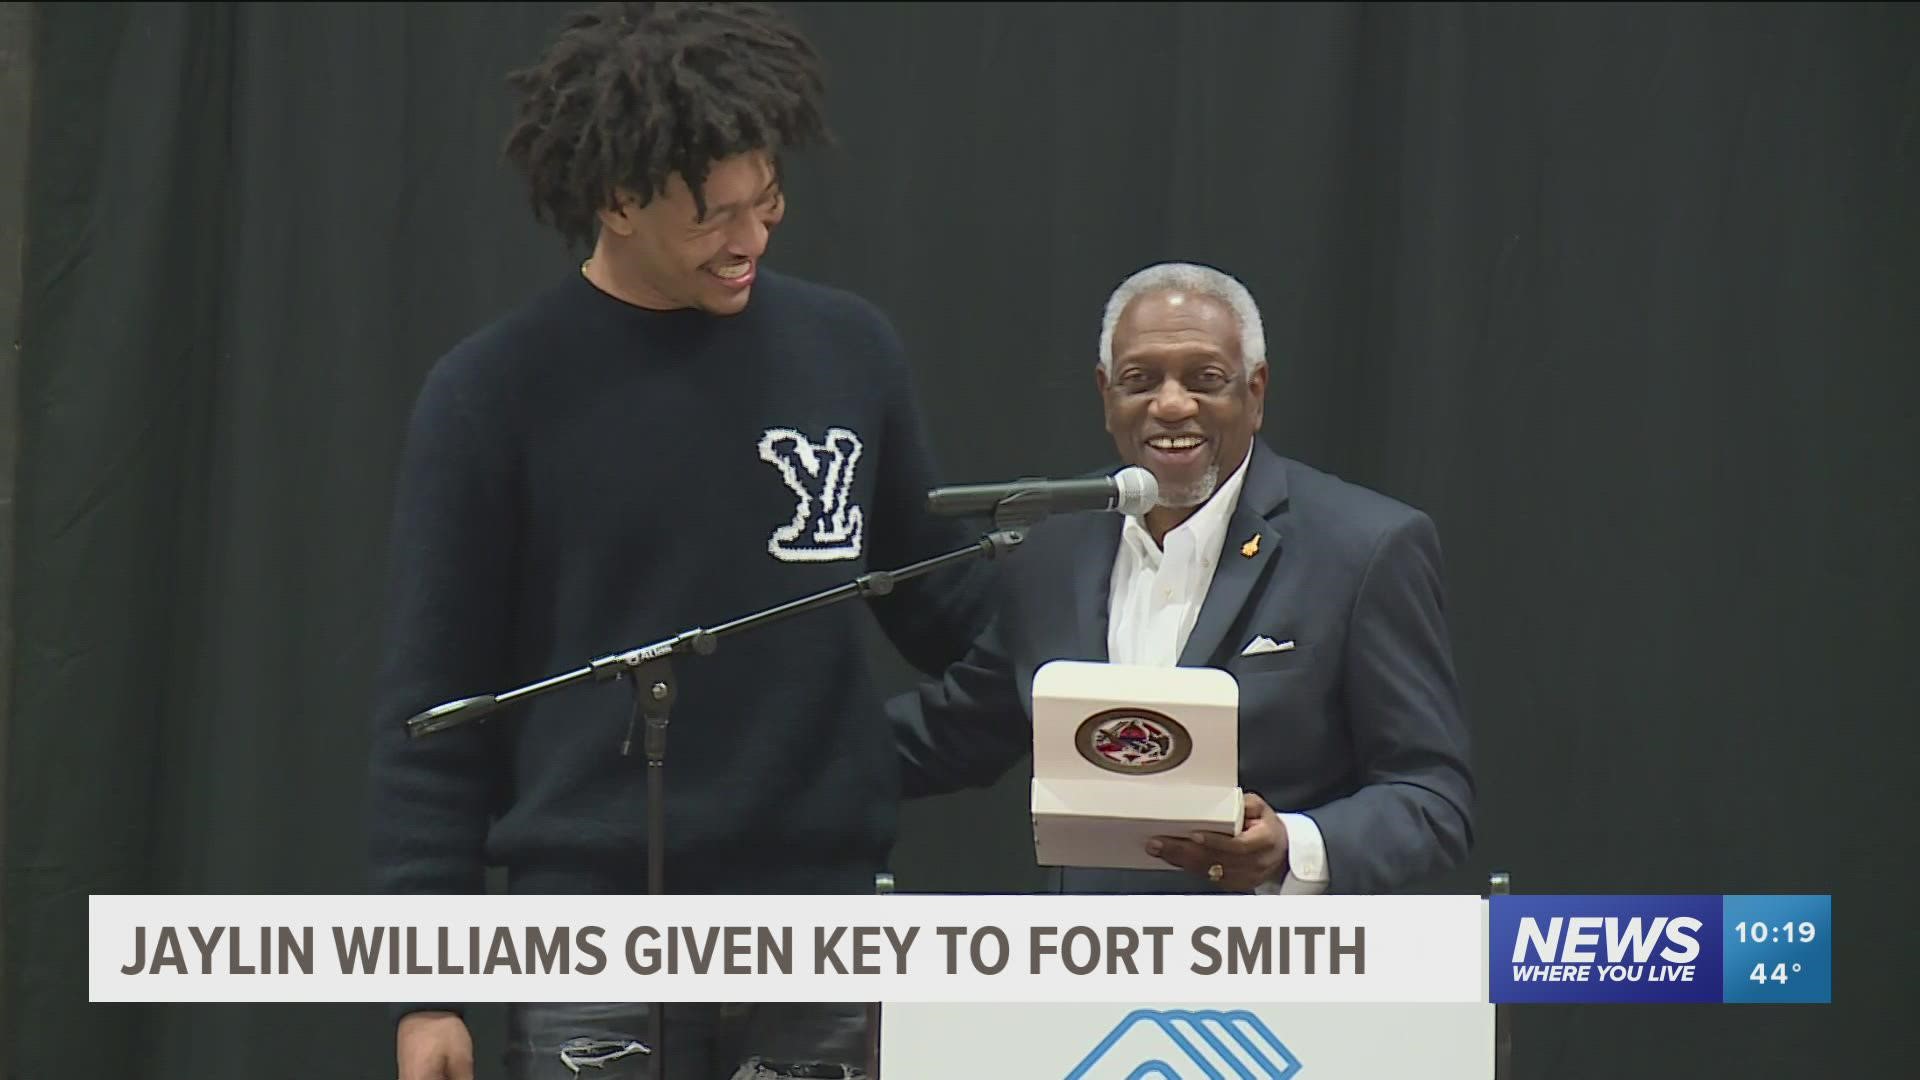 The Razorback basketball star and Fort Smith native was given a key to the city by Mayor McGill after speaking at the Boys & Girls Club he used to attend as a kid.